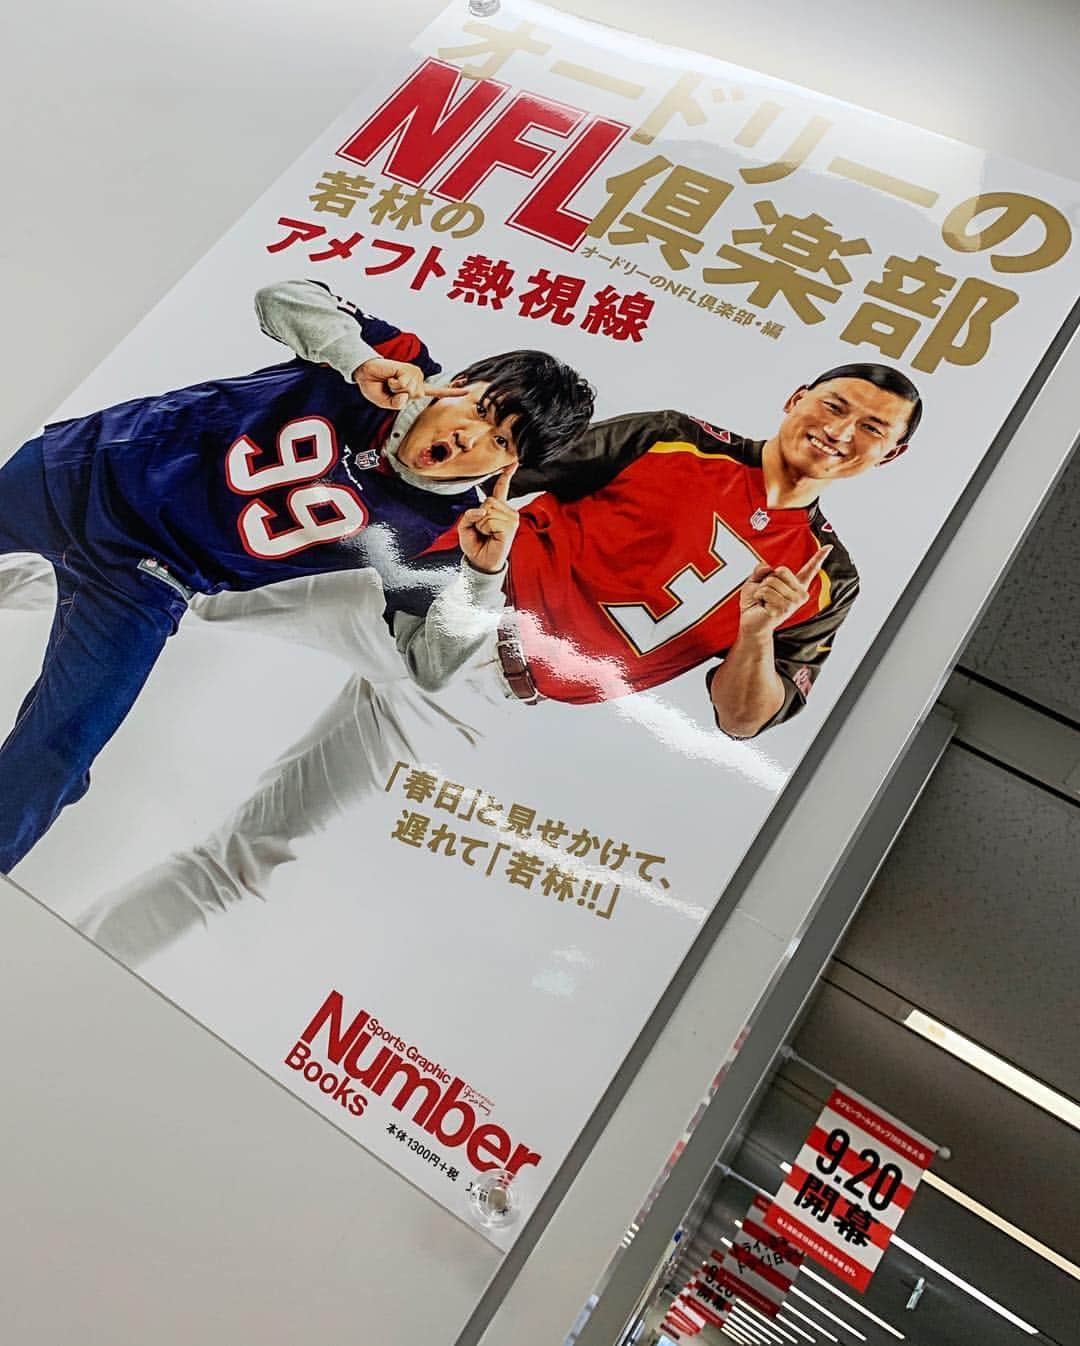 メロディー・モリタさんのインスタグラム写真 - (メロディー・モリタInstagram)「Hello from Nippon TV's iconic studios!🤗💙💚💛❤️ I had a blast spending the day with the NFL Club team, the TV program I report for when interviewing the NFL players, etc! It's currently offseason for the league, but we have some fun content coming up🙈🏈 Speaking of Oodori's NFL Club, Oodori's Kasuga-san revealed on live TV yesterday that he is going to marry his gf of 11 years‼️😭🎉🔔✨ (He was actually here at the studio as well filming for another show, so I was thrilled when I found out!) Both Kasuga-san and Wakabayashi-san are literally the most down-to-earth and caring people I've met in this industry, so I couldn't hold back my tears😢 Congratulations, Kasuga-san!! Wishing you a lifetime of love & happiness!!!💖 * 現地リポーターを務めさせて頂いている、『オードリーのNFL倶楽部』（日テレ）でお世話になっている皆さんと、とても楽しい時間を過ごすことができました‼️☺️🎀✨ NFLは現在オフシーズン中なのですが、今だからできる面白い企画をスタッフさん達が進めてくれています。こちらも、どうぞお楽しみに！😆 * 『ZIP!』、『ヒルナンデス！』、『news zero』、スポーツ＆報道局などなど、色々なスタジオにもお邪魔させて頂きました🌟✨ * そして、昨日ご結婚されることを発表されましたオードリーの春日さんも、別番組の収録のためスタジオにいらっしゃいました!!😆 オードリーのお二人はon and off cameraでとってもとっても素敵な方々ですので心から嬉しいです😭😭😭👏 春日さん、本当におめでとうございます‼️‼️どうぞ末長くお幸せに!!!!💖 #MelodeeinJapan #日テレ #日本テレビ #NipponTV #NFLclub #オードリーのNFL倶楽部 #ZIP #newszero #ヒルナンデス」4月19日 14時13分 - melodeemorita